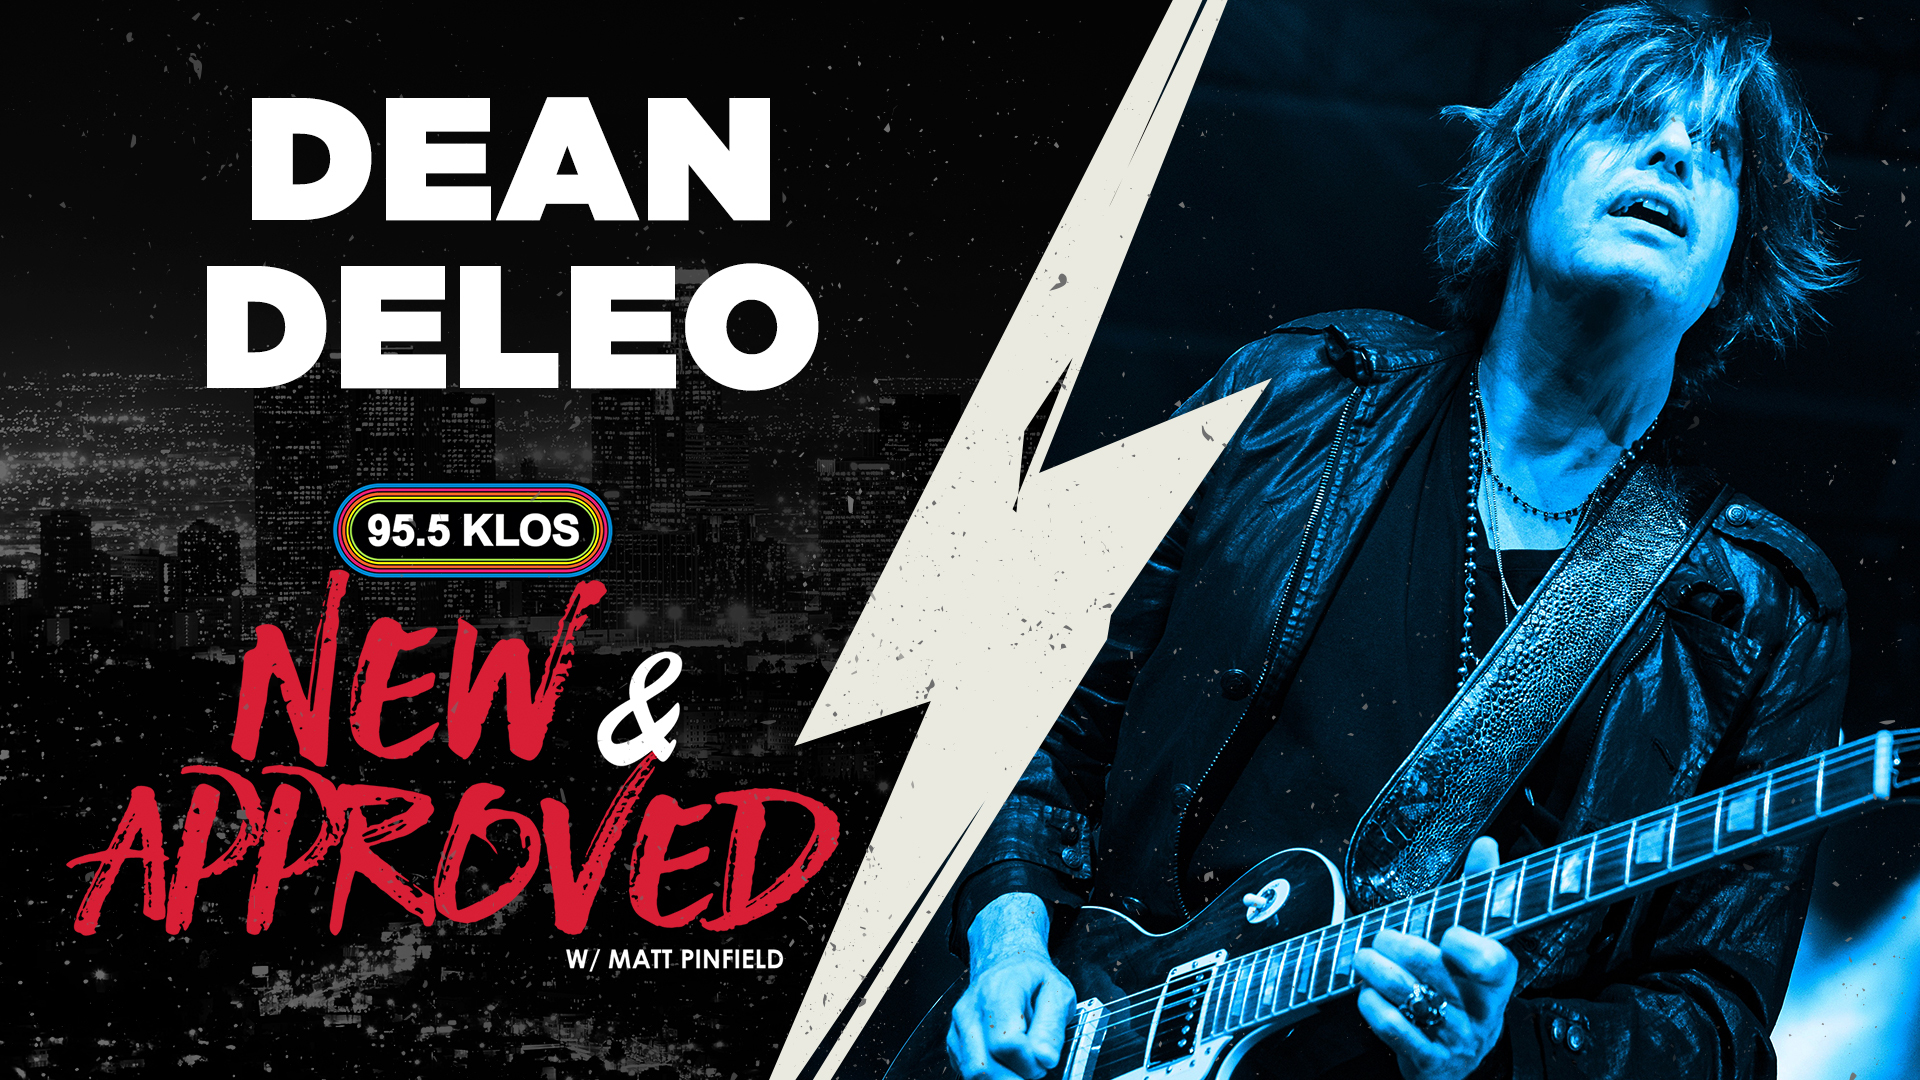 Dean DeLeo Speaks With Matt Pinfield About New Project Trip The Witch On New & Approved